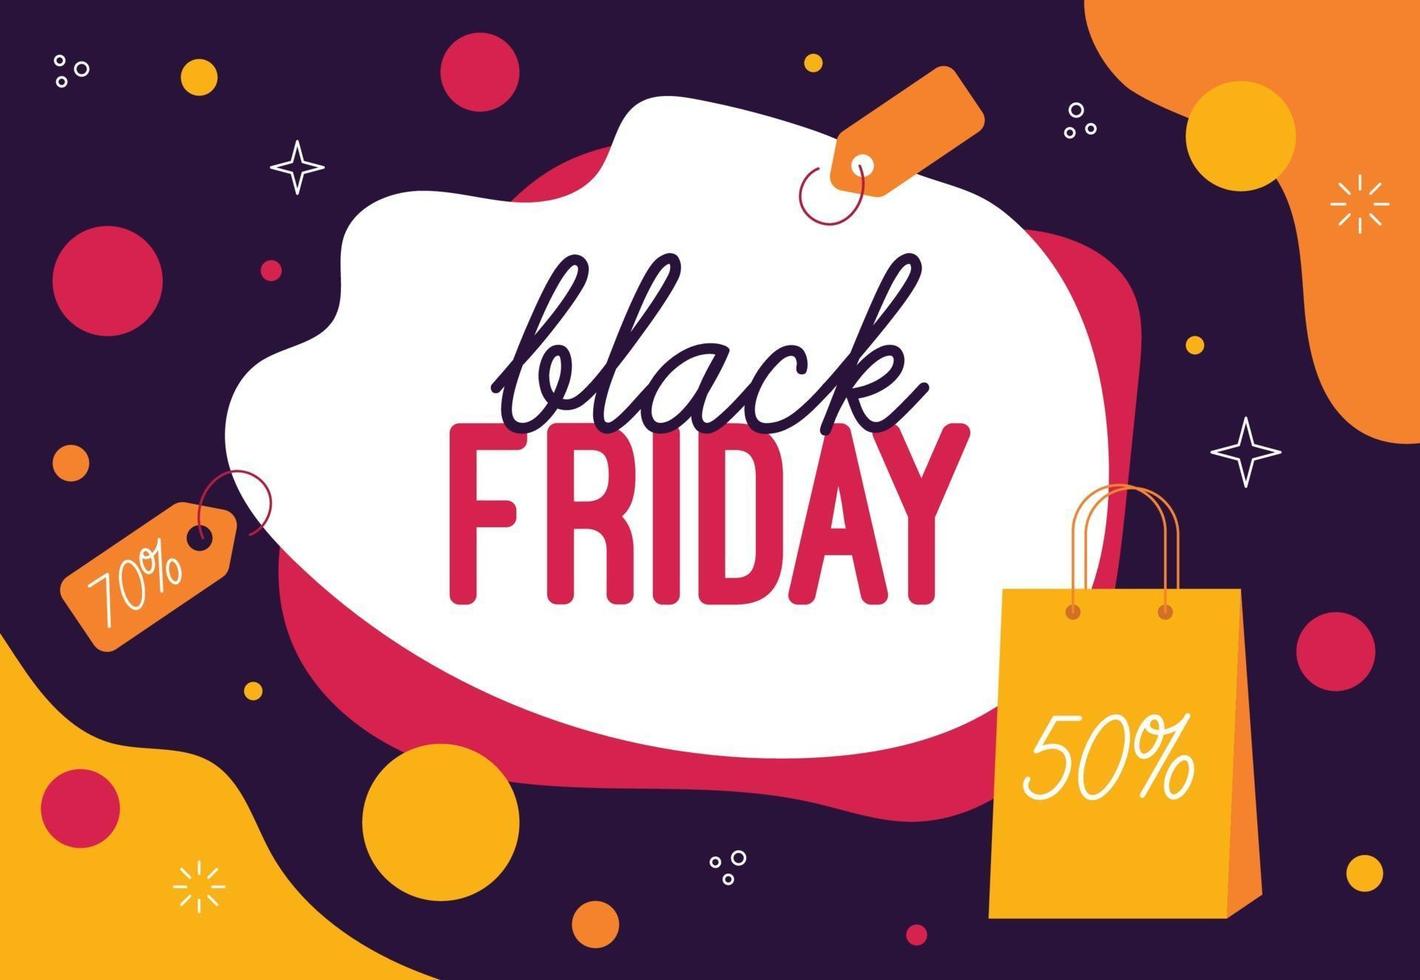 Black Friday sales ane discounts abstract banner vector